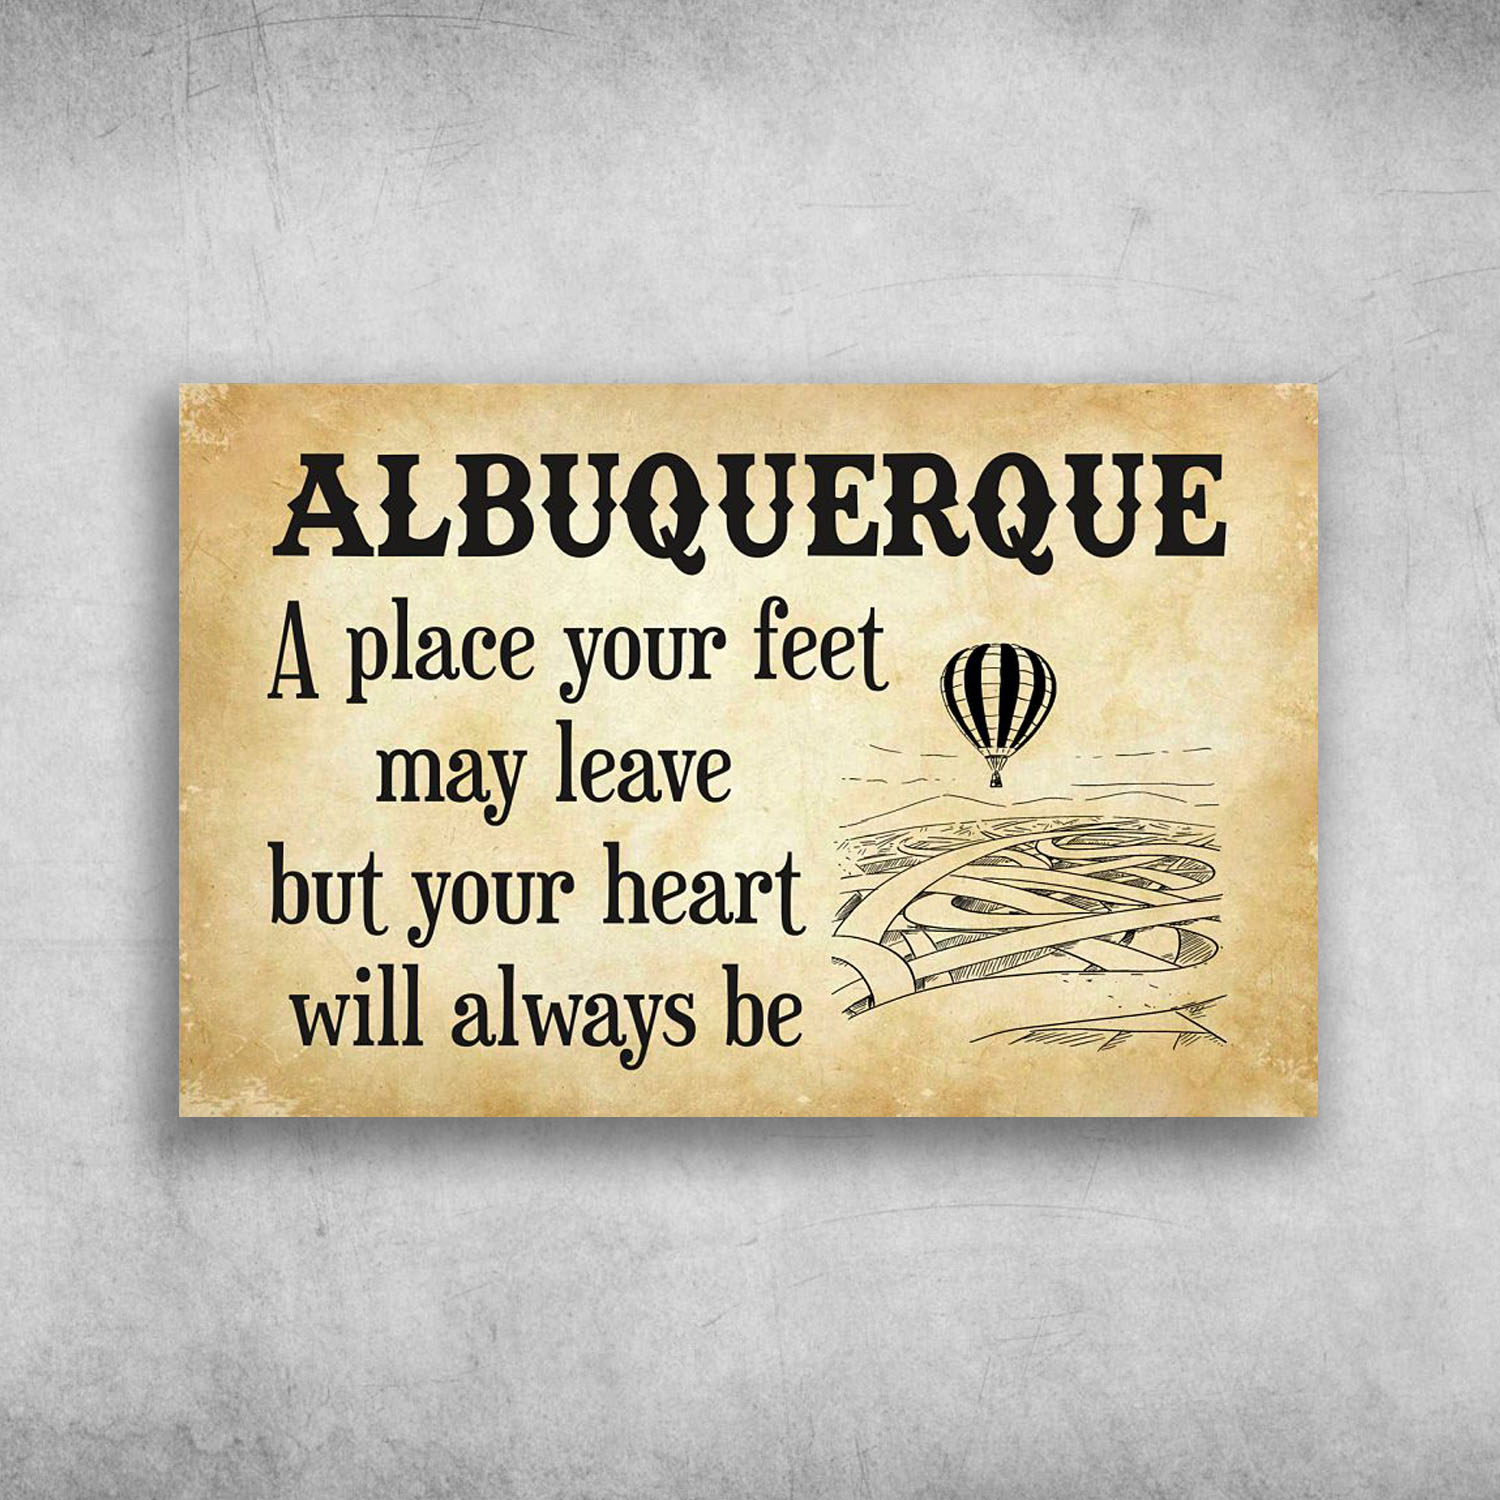 Albuquerque A Place Your Feet May Leave But Your Heart Will Always Be